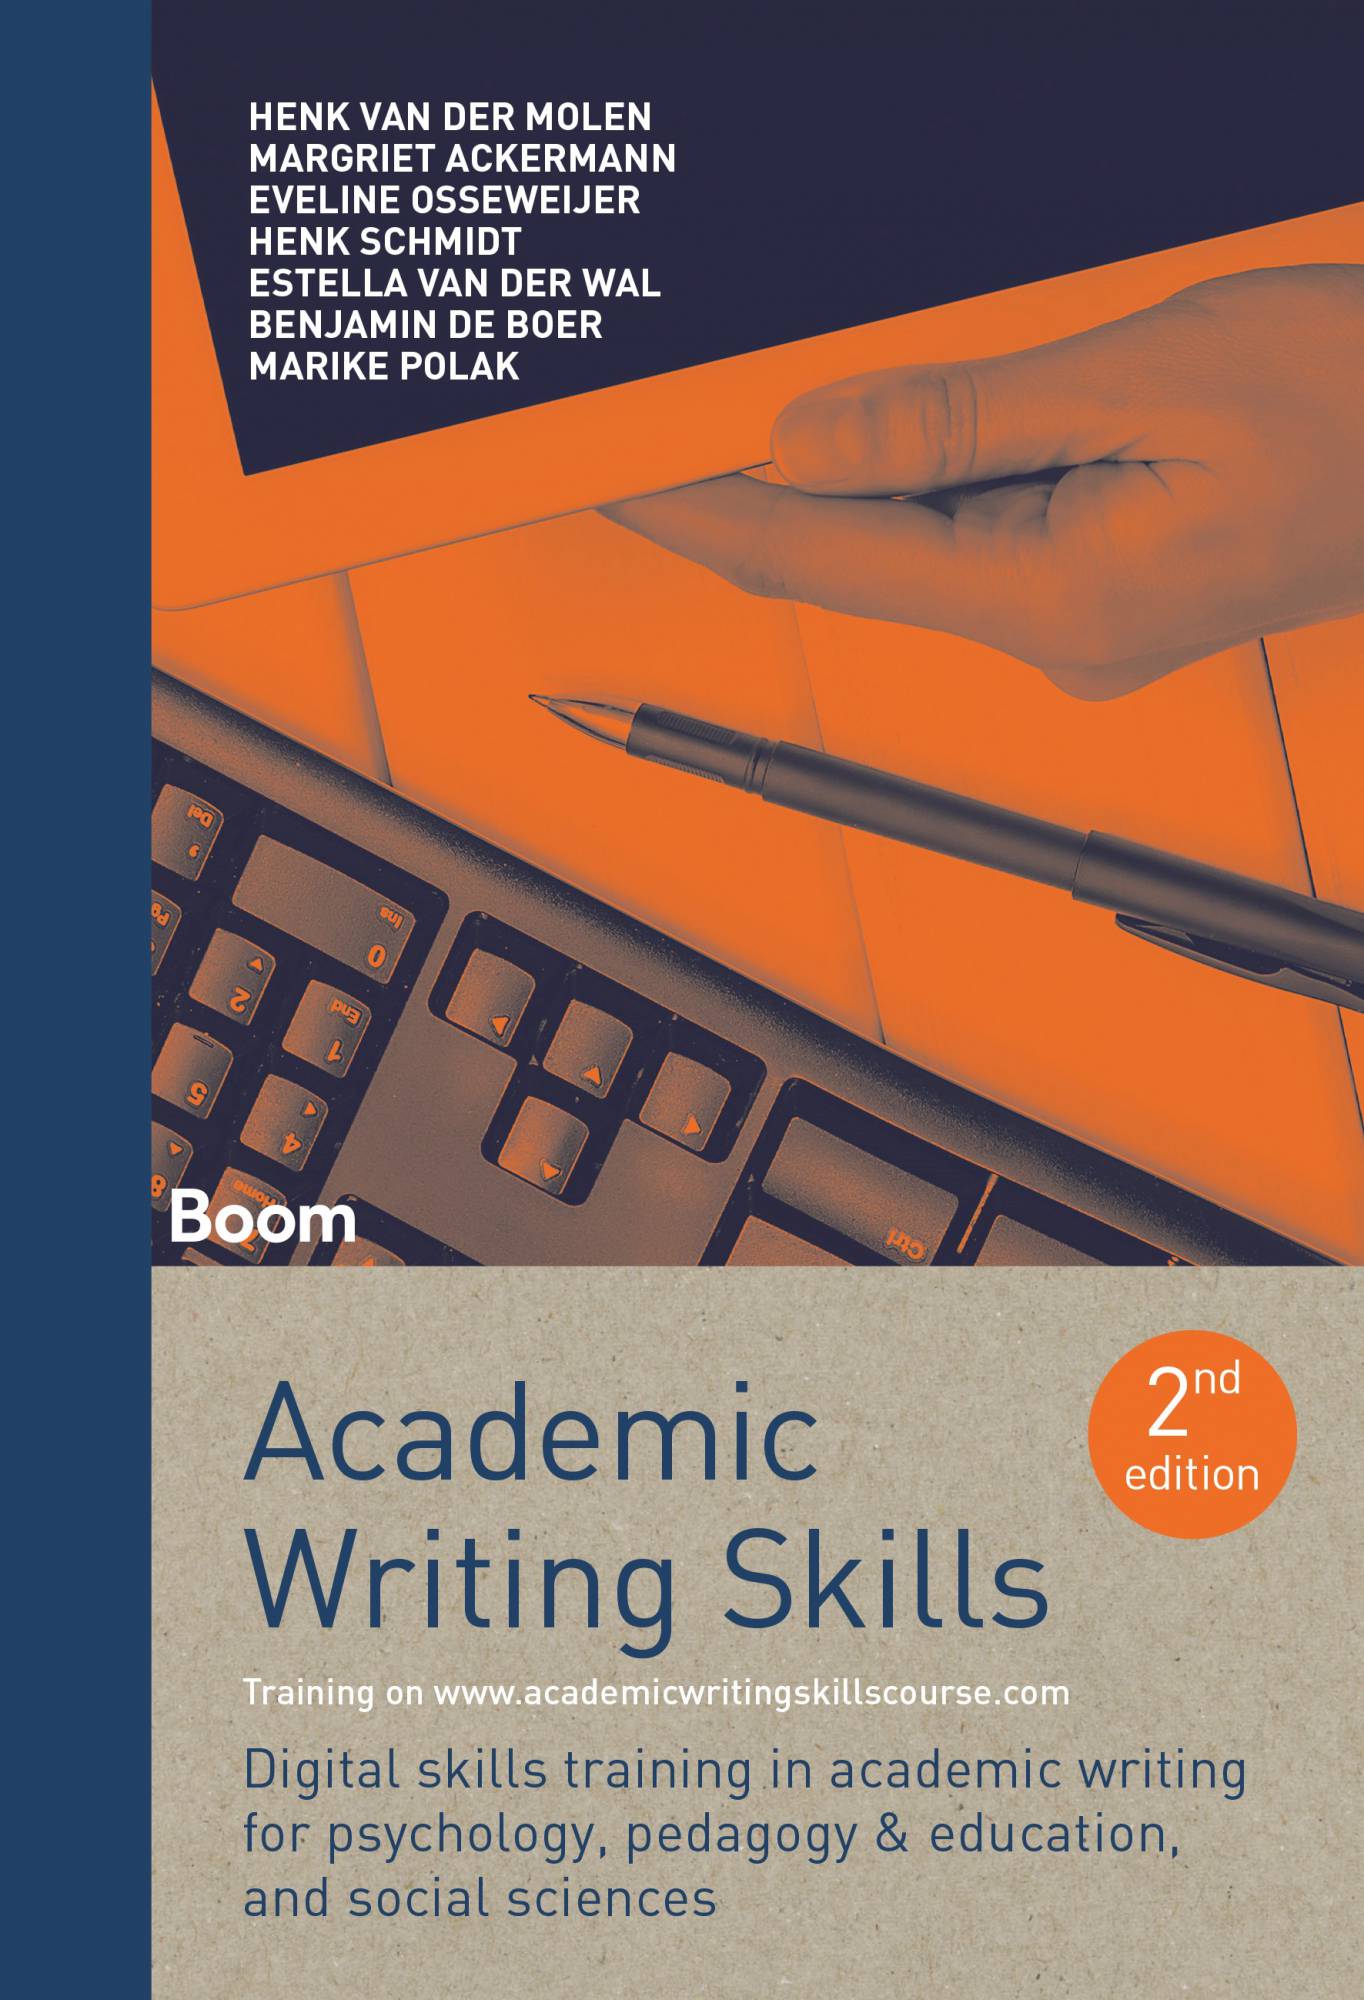 research title about writing skills